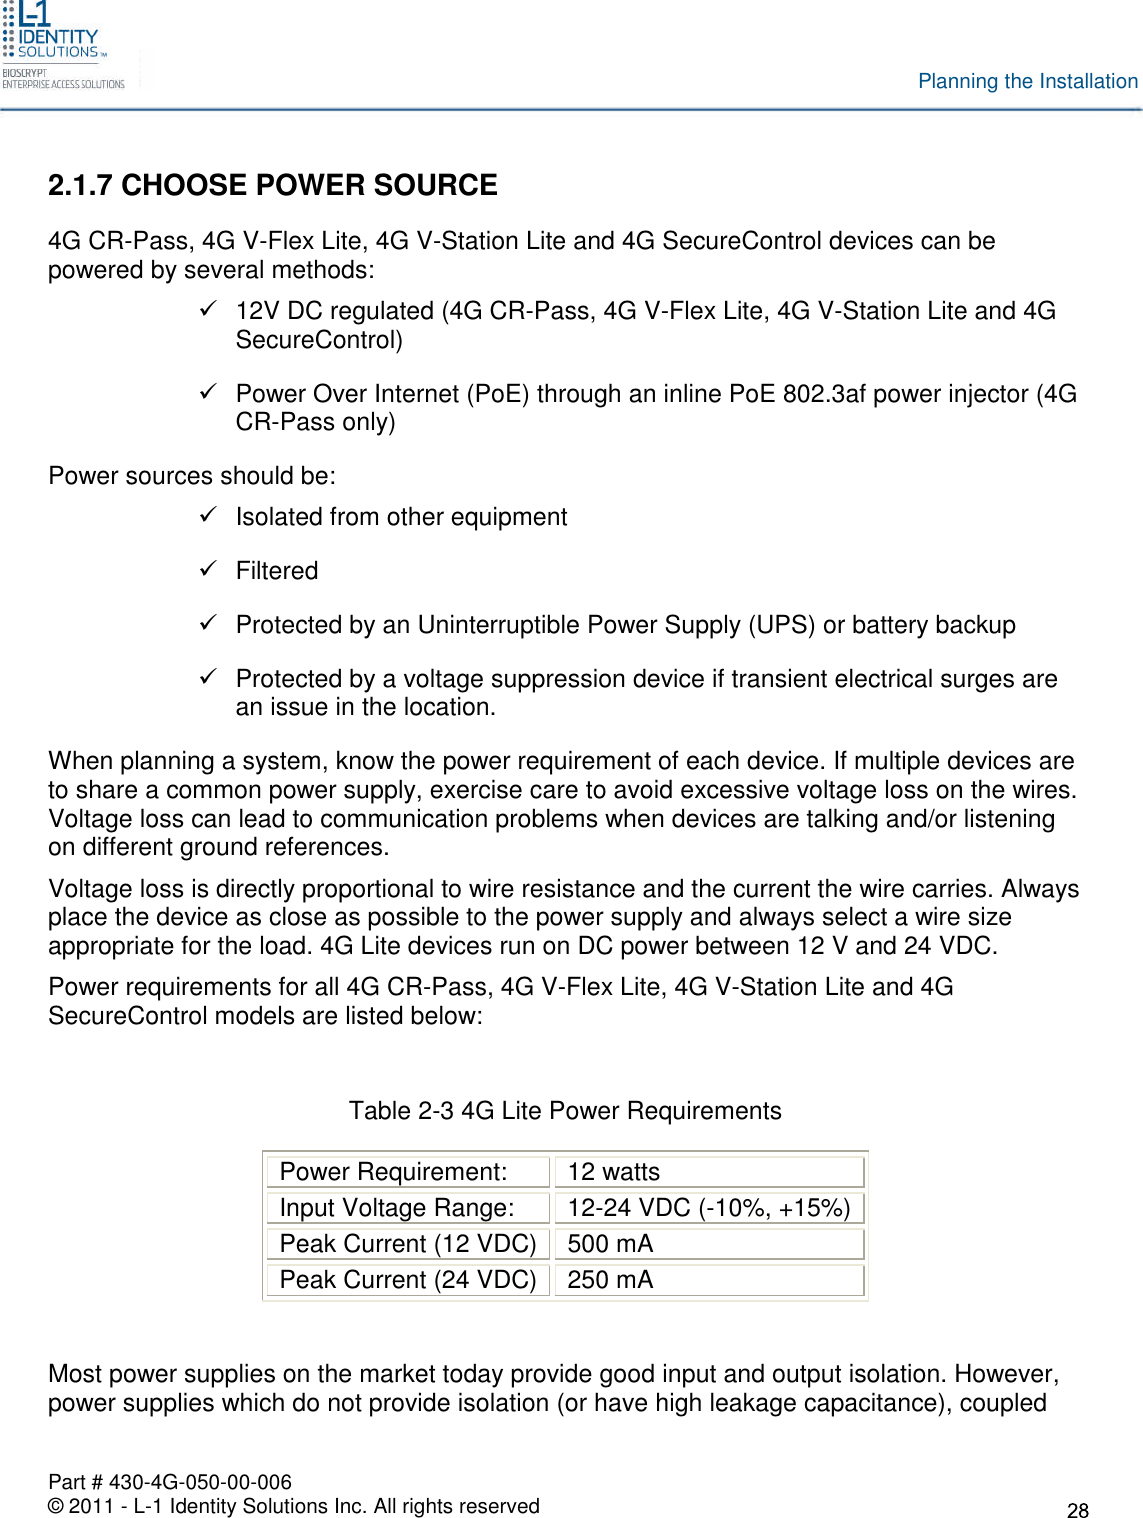 Part # 430-4G-050-00-006© 2011 - L-1 Identity Solutions Inc. All rights reservedPlanning the Installation2.1.7 CHOOSE POWER SOURCE4G CR-Pass, 4G V-Flex Lite, 4G V-Station Lite and 4G SecureControl devices can bepowered by several methods:12V DC regulated (4G CR-Pass, 4G V-Flex Lite, 4G V-Station Lite and 4GSecureControl)Power Over Internet (PoE) through an inline PoE 802.3af power injector (4GCR-Pass only)Power sources should be:Isolated from other equipmentFilteredProtected by an Uninterruptible Power Supply (UPS) or battery backupProtected by a voltage suppression device if transient electrical surges arean issue in the location.When planning a system, know the power requirement of each device. If multiple devices areto share a common power supply, exercise care to avoid excessive voltage loss on the wires.Voltage loss can lead to communication problems when devices are talking and/or listeningon different ground references.Voltage loss is directly proportional to wire resistance and the current the wire carries. Alwaysplace the device as close as possible to the power supply and always select a wire sizeappropriate for the load. 4G Lite devices run on DC power between 12 V and 24 VDC.Power requirements for all 4G CR-Pass, 4G V-Flex Lite, 4G V-Station Lite and 4GSecureControl models are listed below:Table 2-3 4G Lite Power RequirementsPower Requirement: 12 wattsInput Voltage Range: 12-24 VDC (-10%, +15%)Peak Current (12 VDC) 500 mAPeak Current (24 VDC) 250 mAMost power supplies on the market today provide good input and output isolation. However,power supplies which do not provide isolation (or have high leakage capacitance), coupled